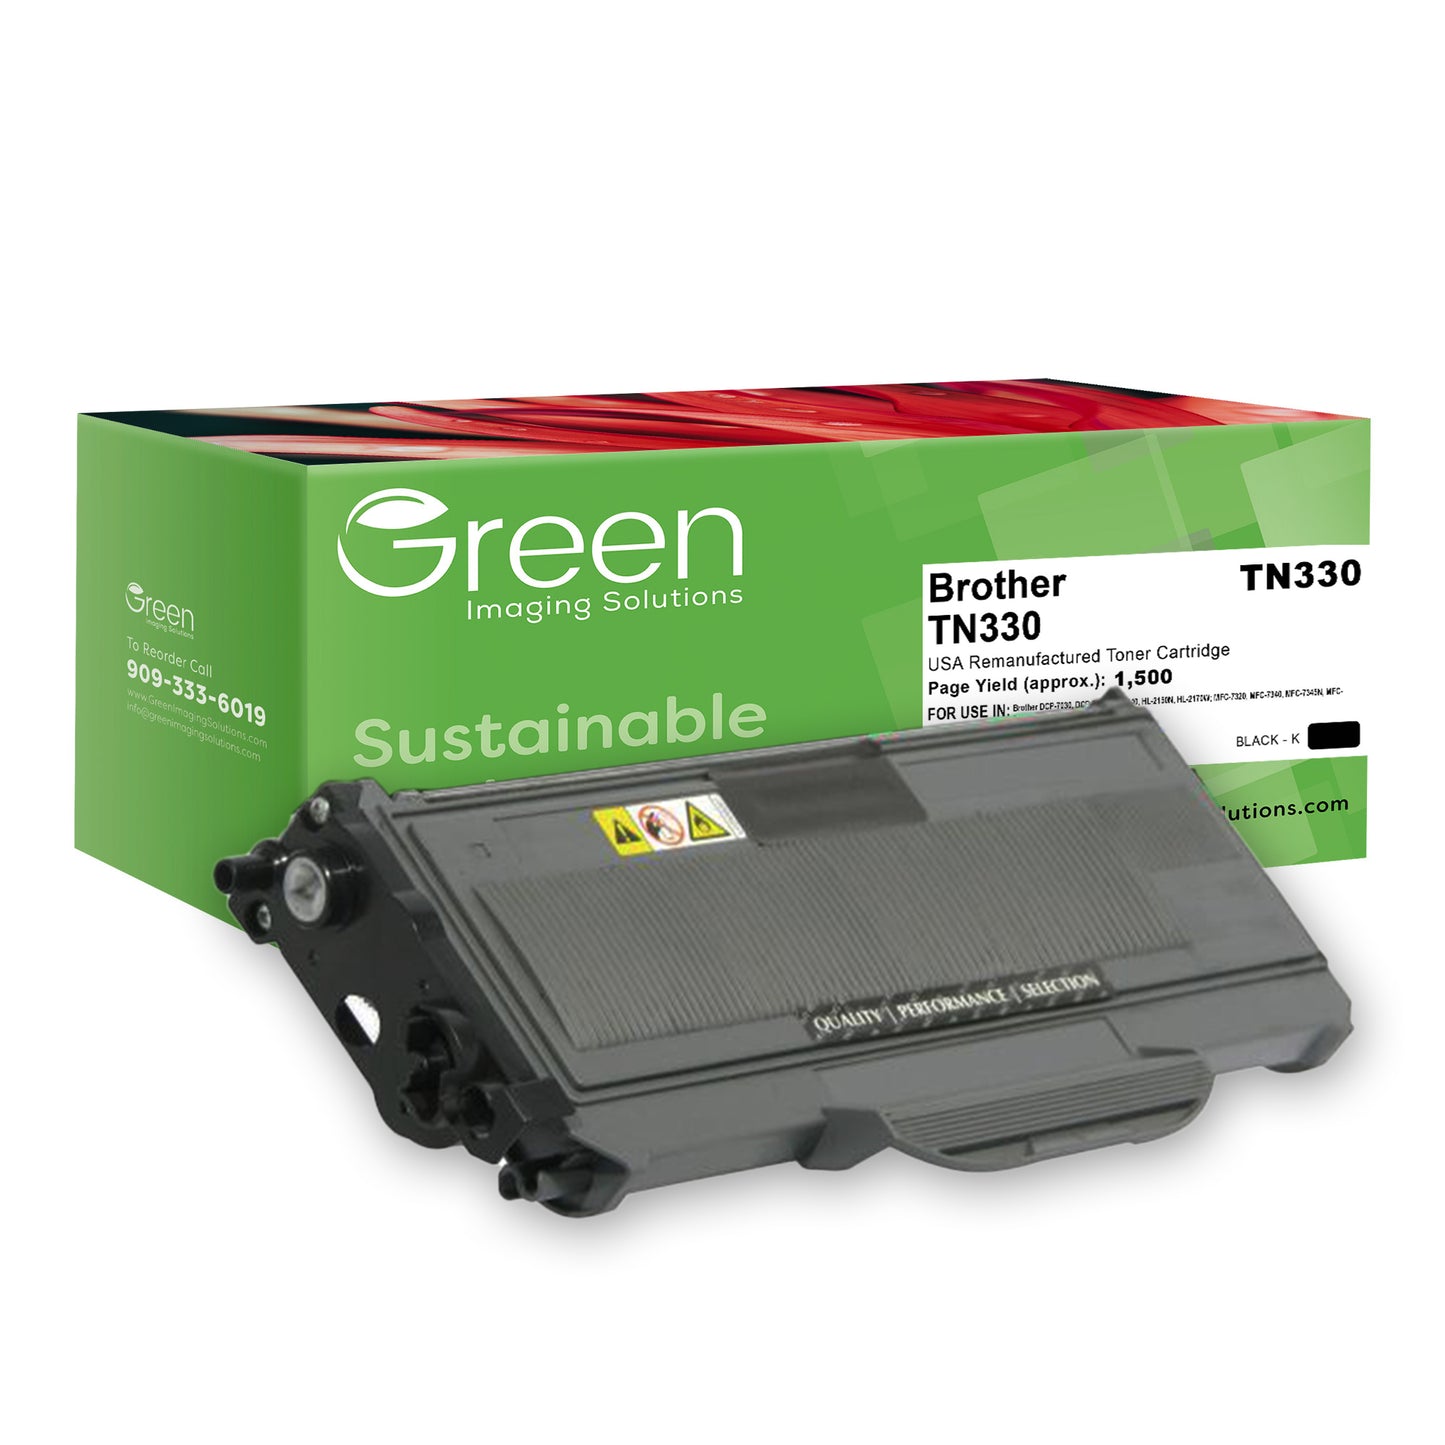 Green Imaging Solutions USA Remanufactured Toner Cartridge for Brother TN330